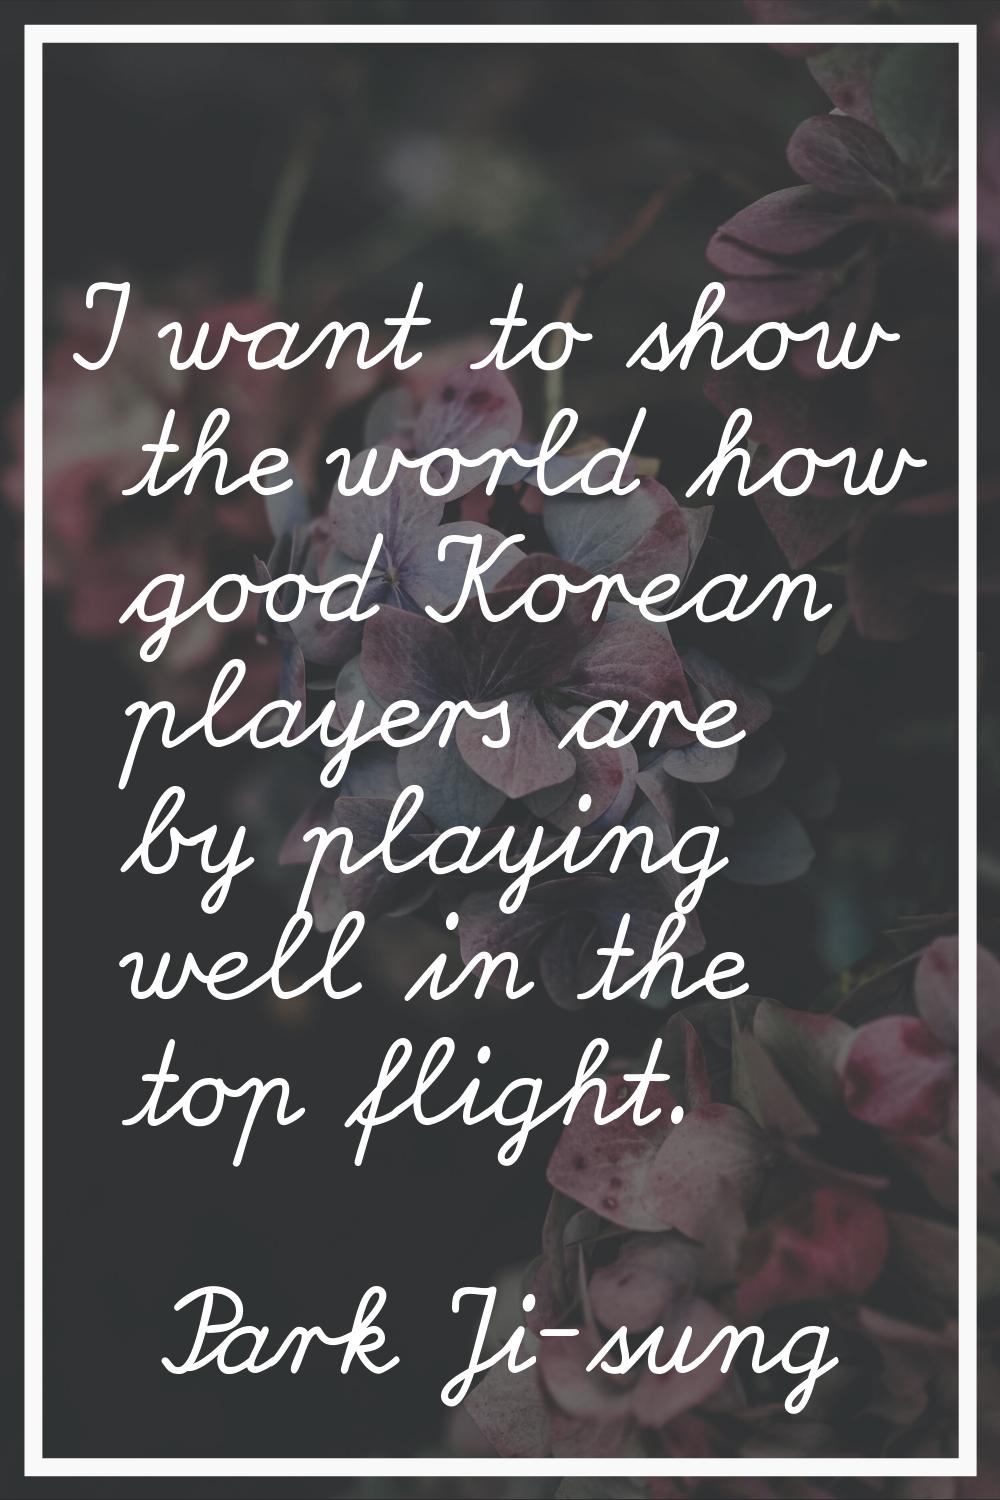 I want to show the world how good Korean players are by playing well in the top flight.